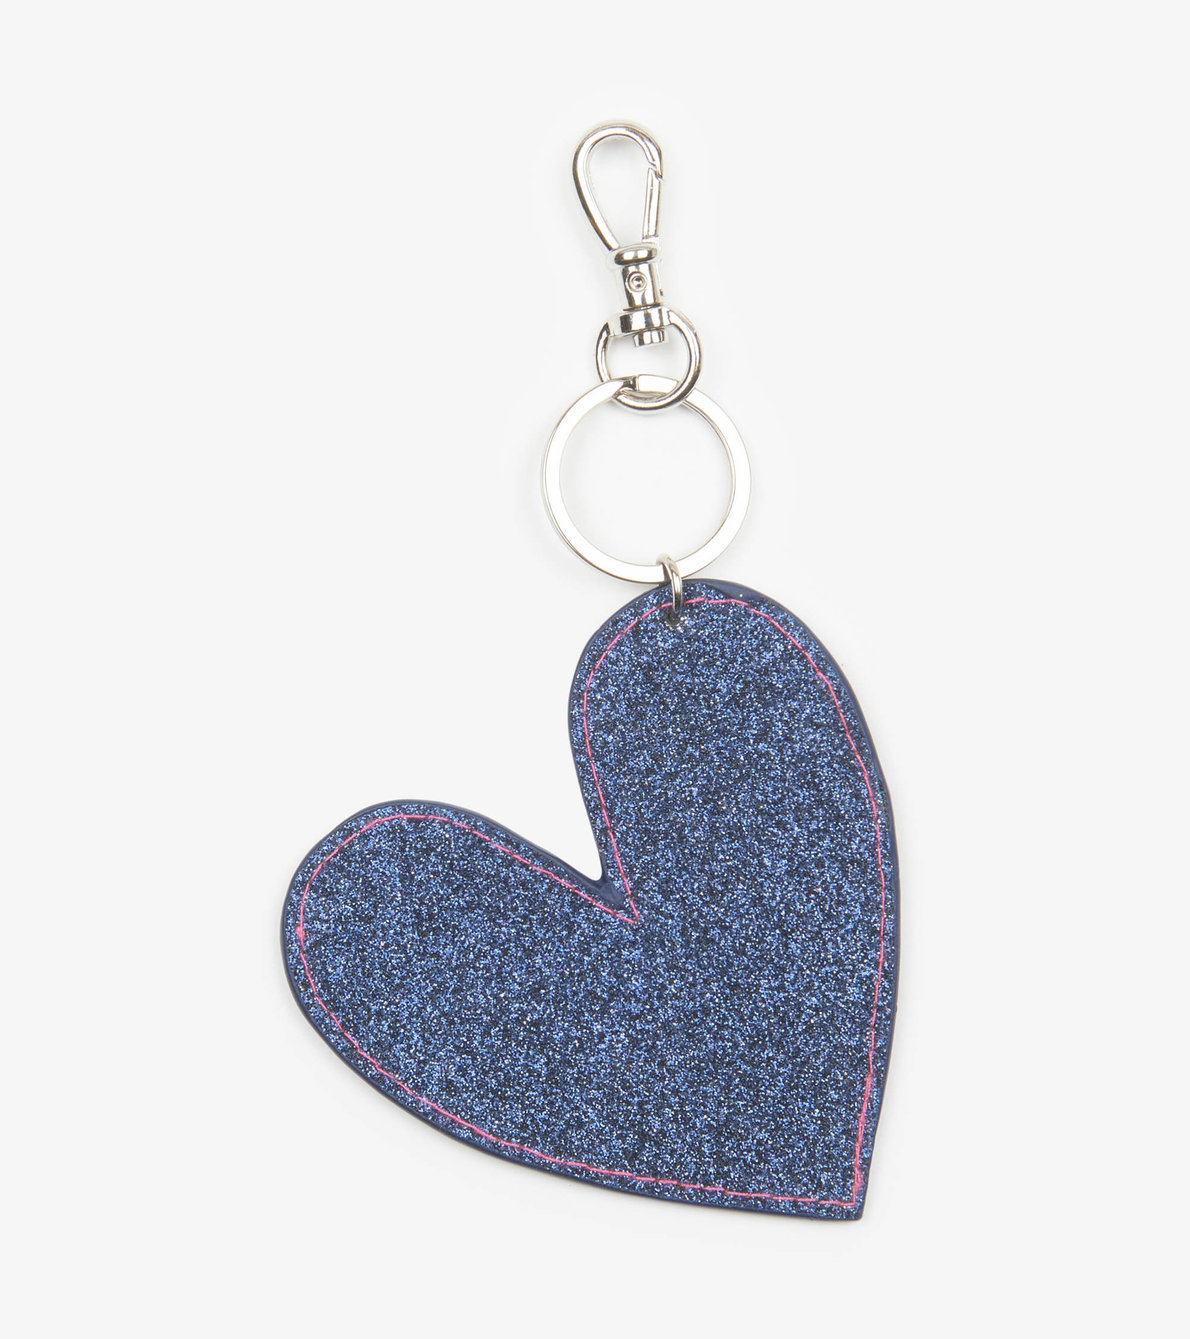 View larger image of Glistening Heart Bag Charm